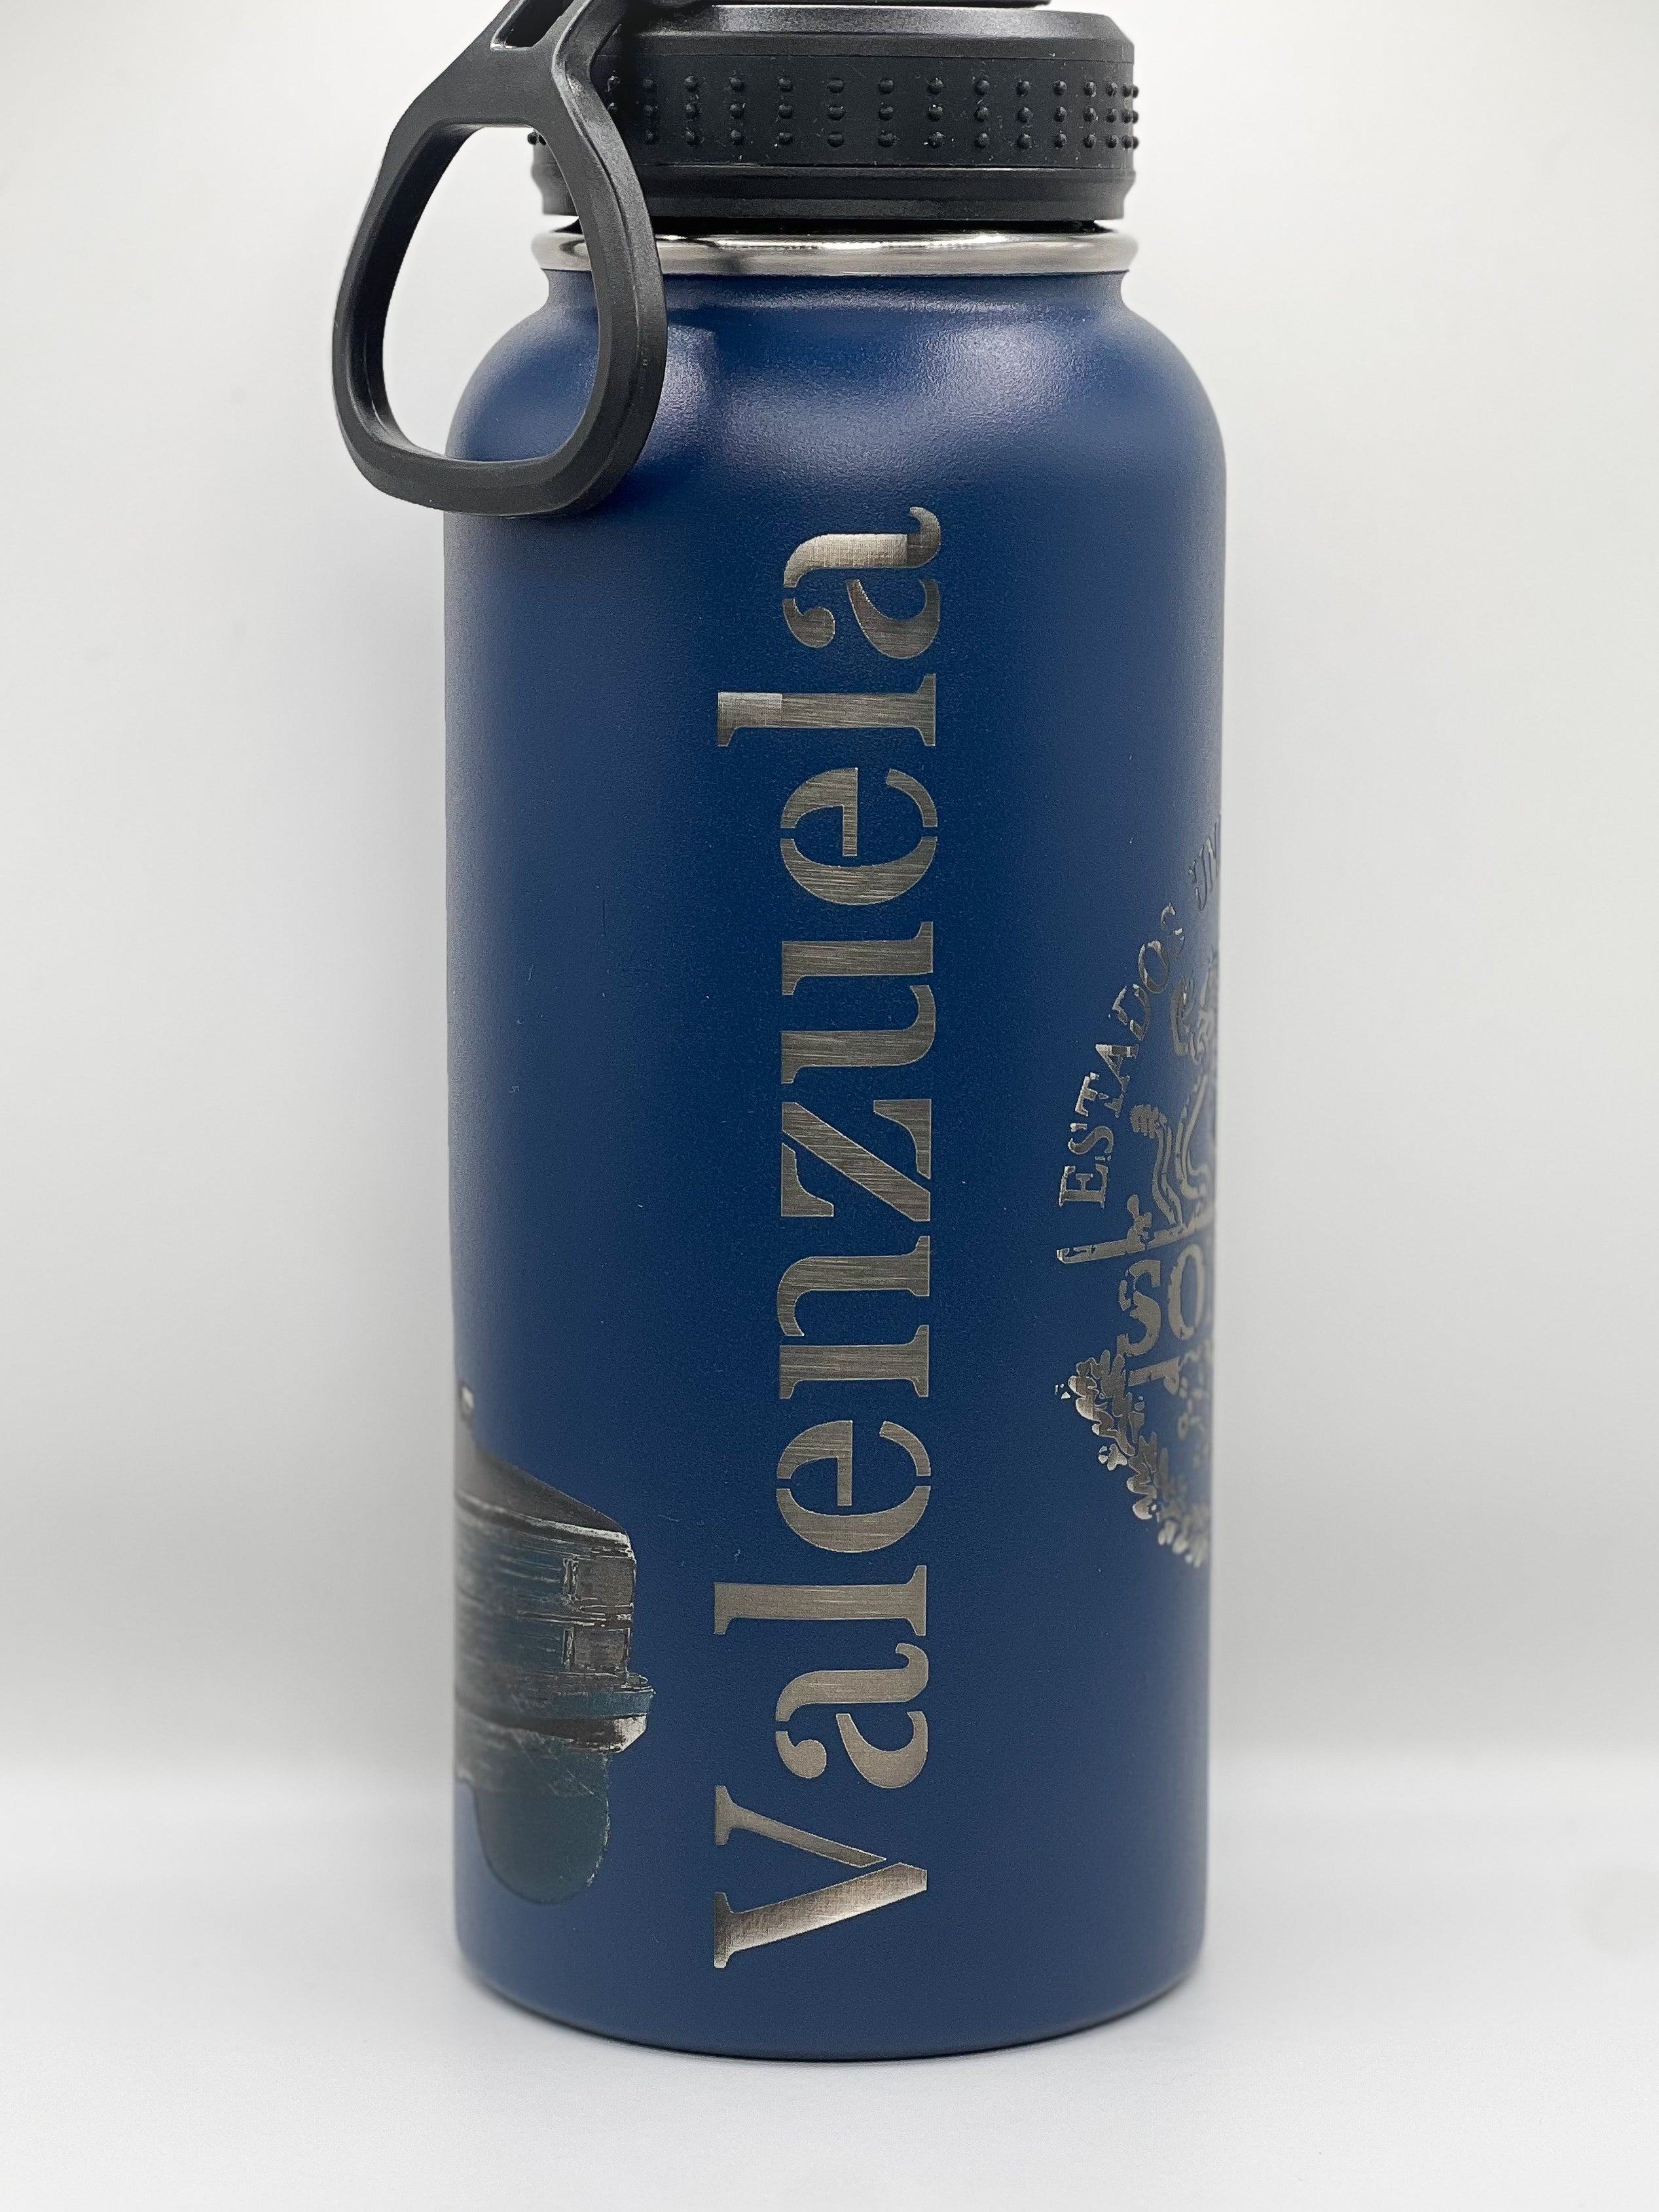 Laser Engraved Portraits on Insulated Water Bottle 32 oz with Straw Lid & Wide Mouth Lids